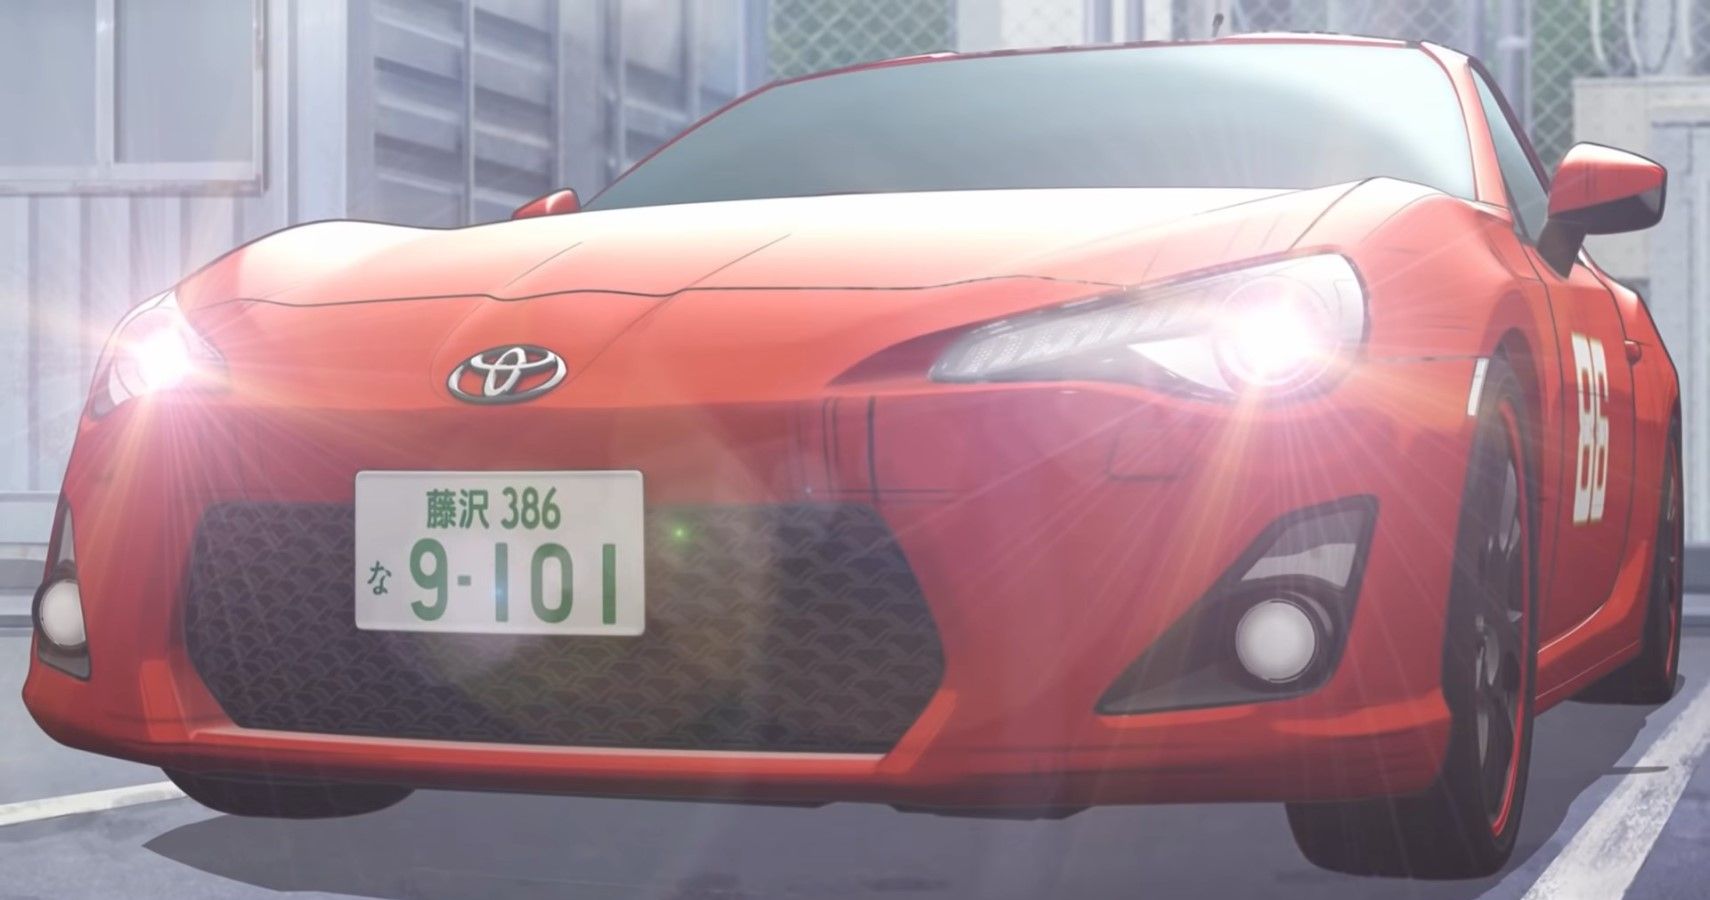 The Toyota 86 is an ode to Takumi's AE86 from Initial D